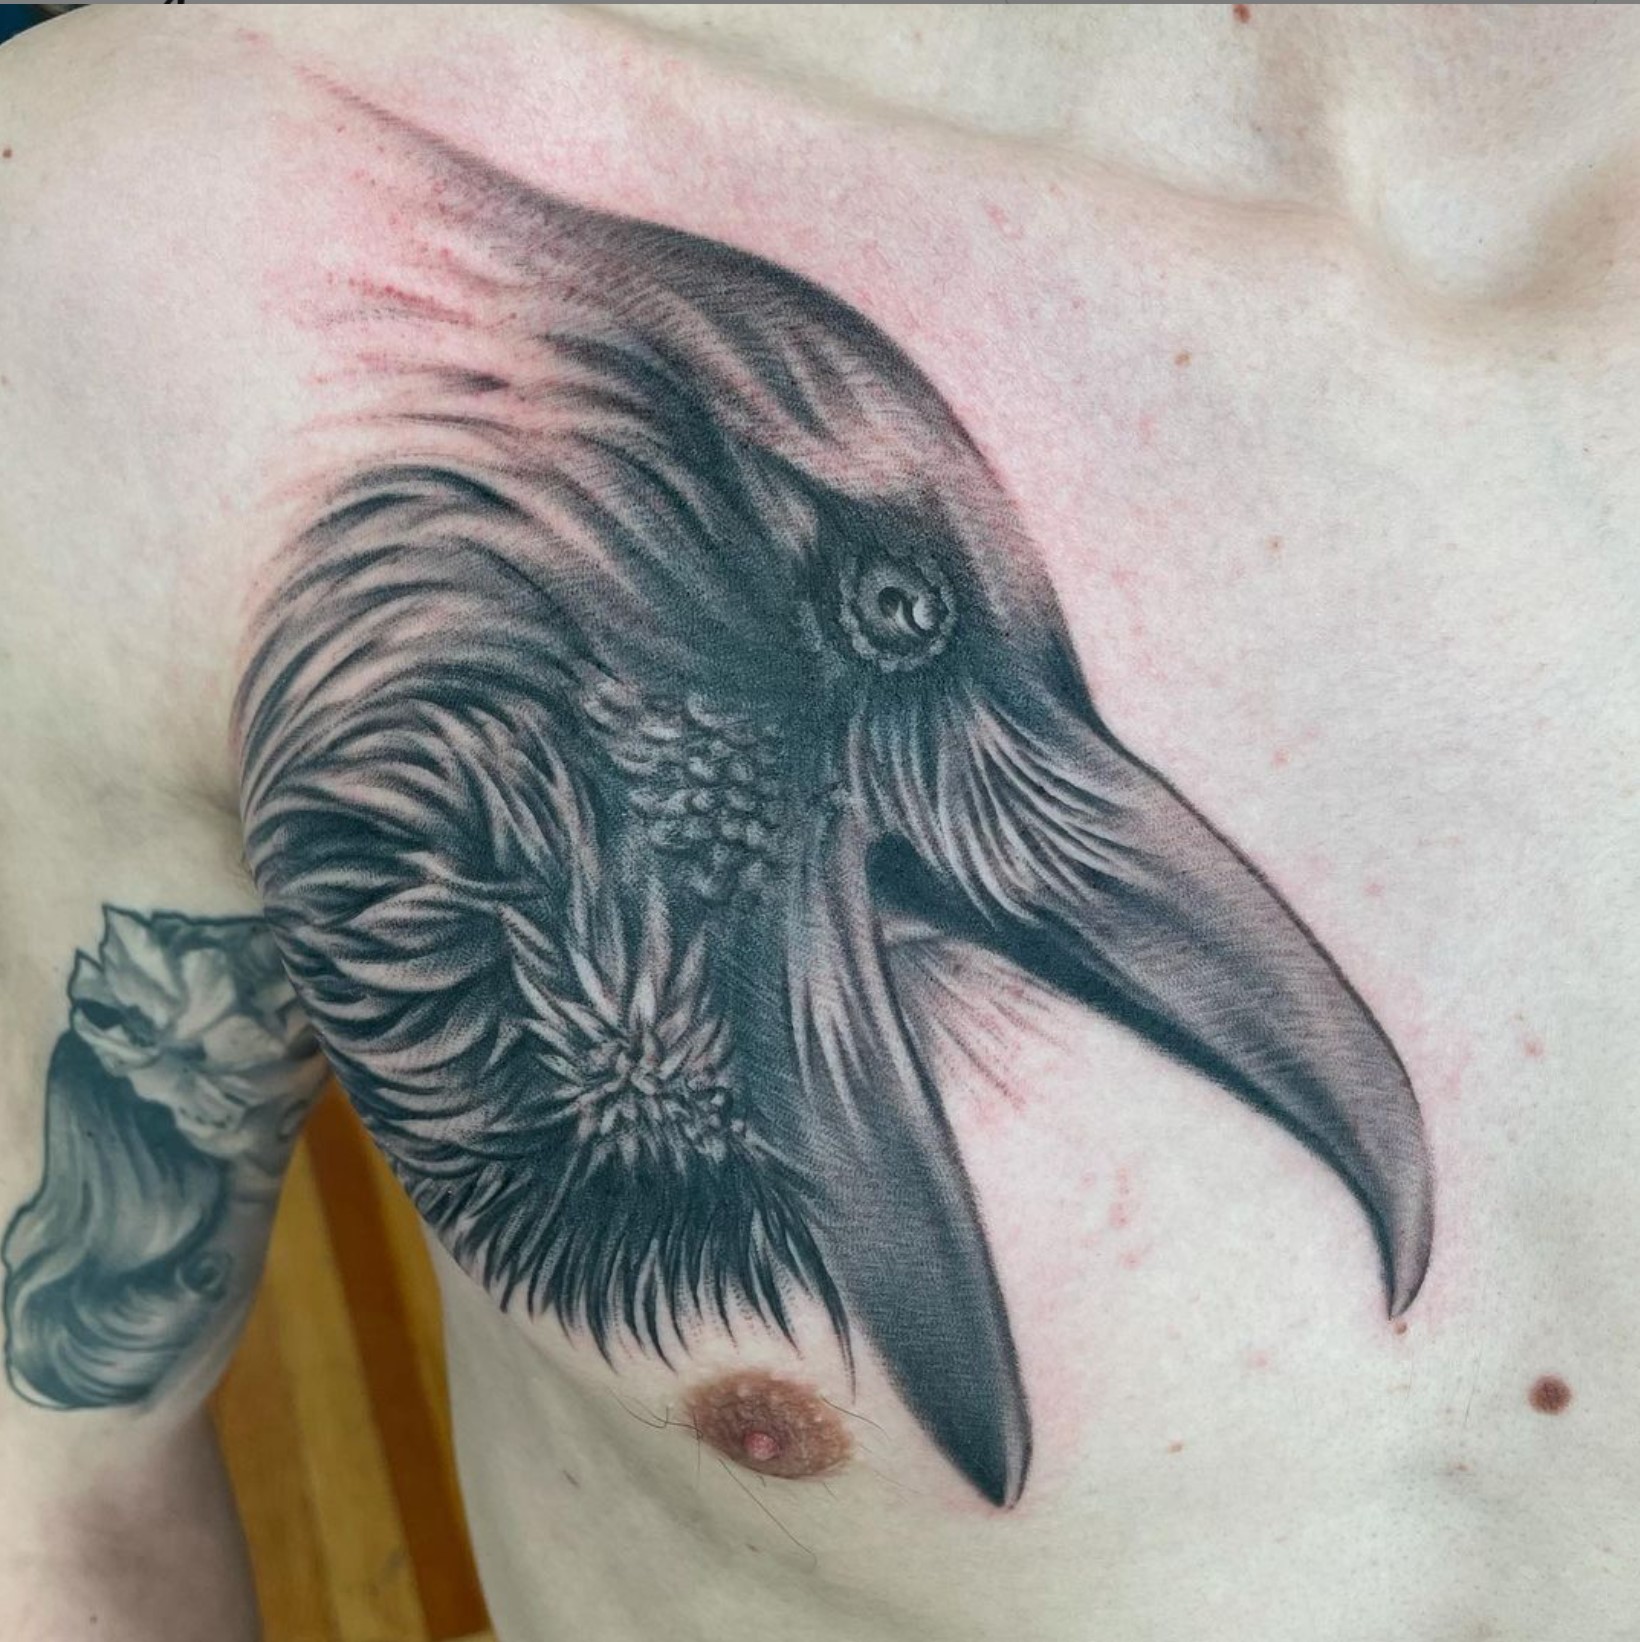 Alchemy Tattoo Collective on Twitter: "The crow symbolizes transformation and change. Do you have an animal totem? Awesome black and grey piece by @mattstephenstattoo "This weeks big animal head. Dude sat like